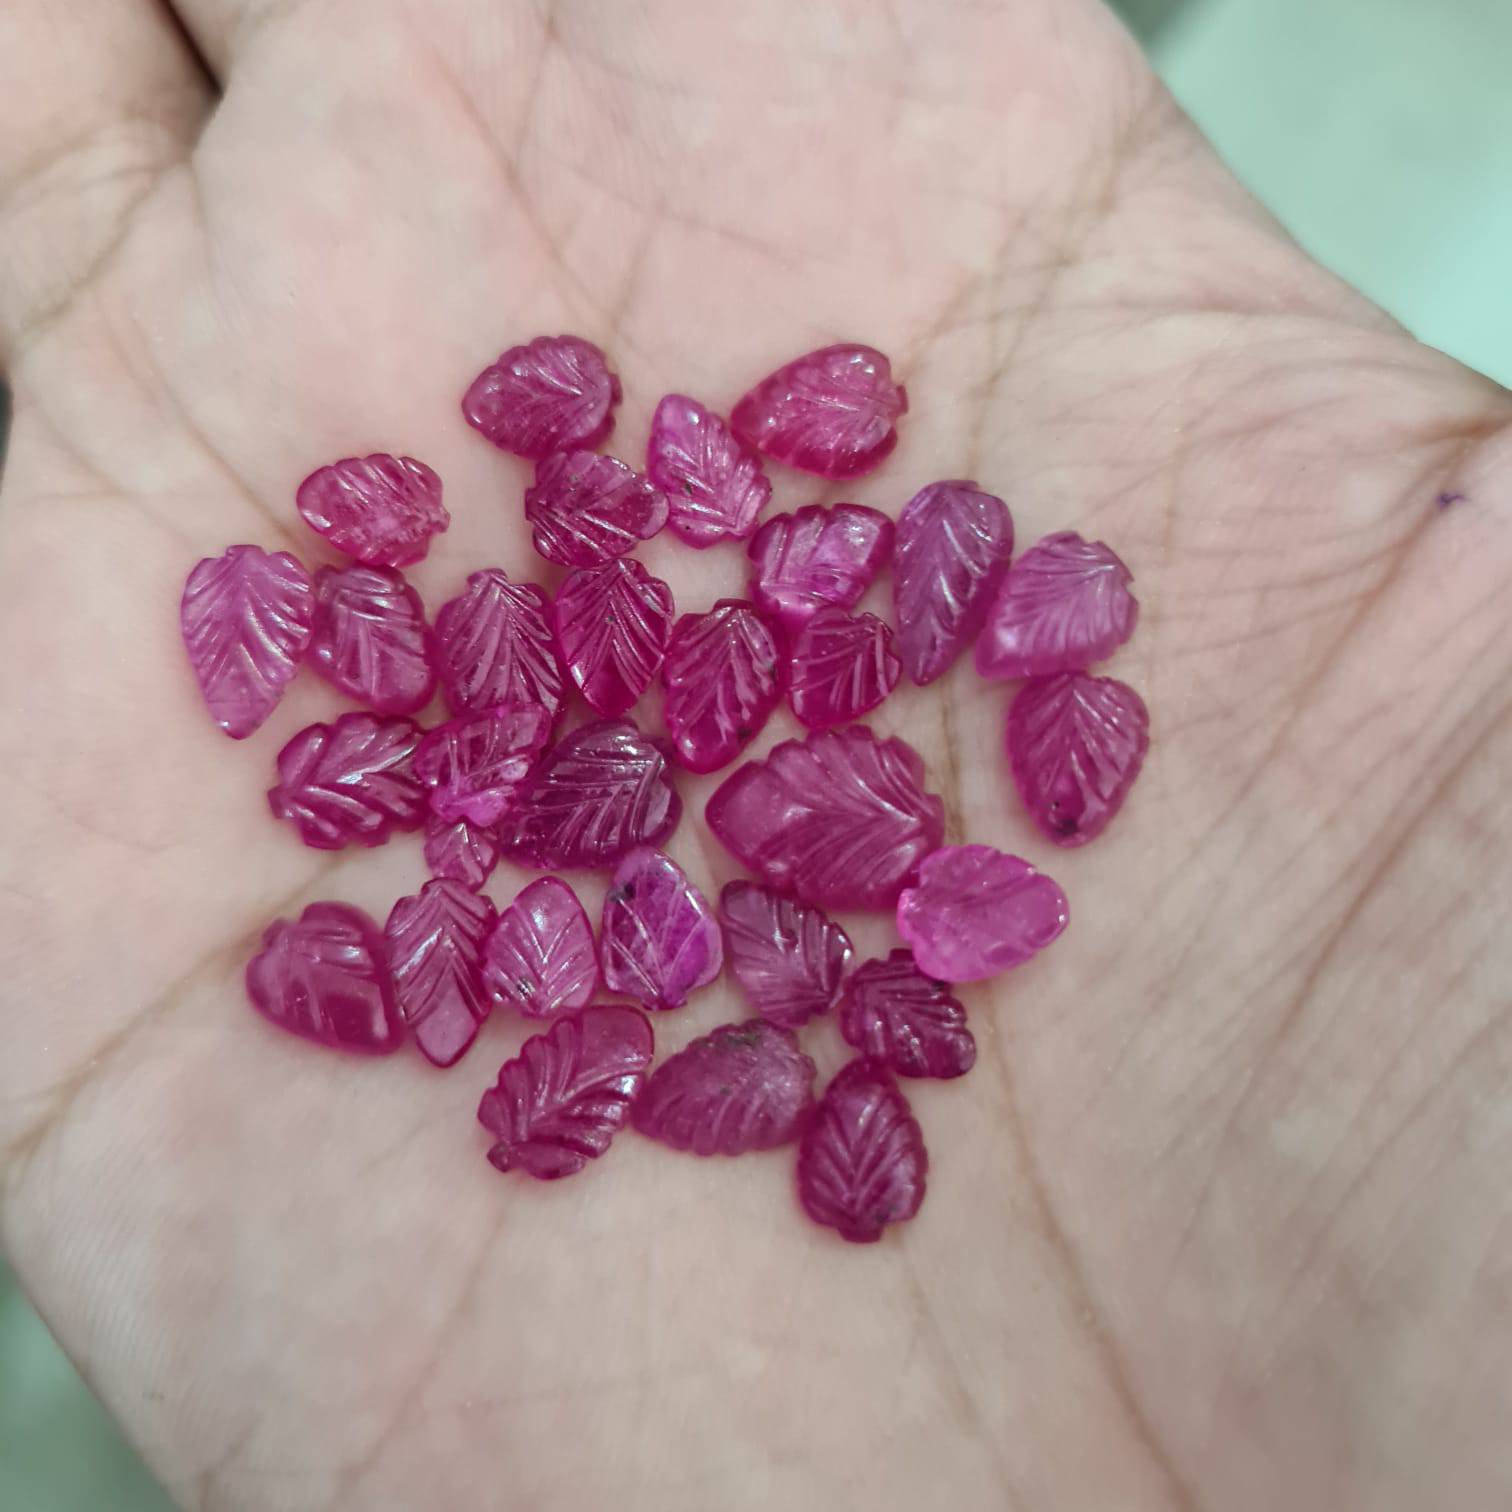 10 Pcs Natural Ruby Carved Leads Big Sizes 8-10mm Ovals African Mined - The LabradoriteKing